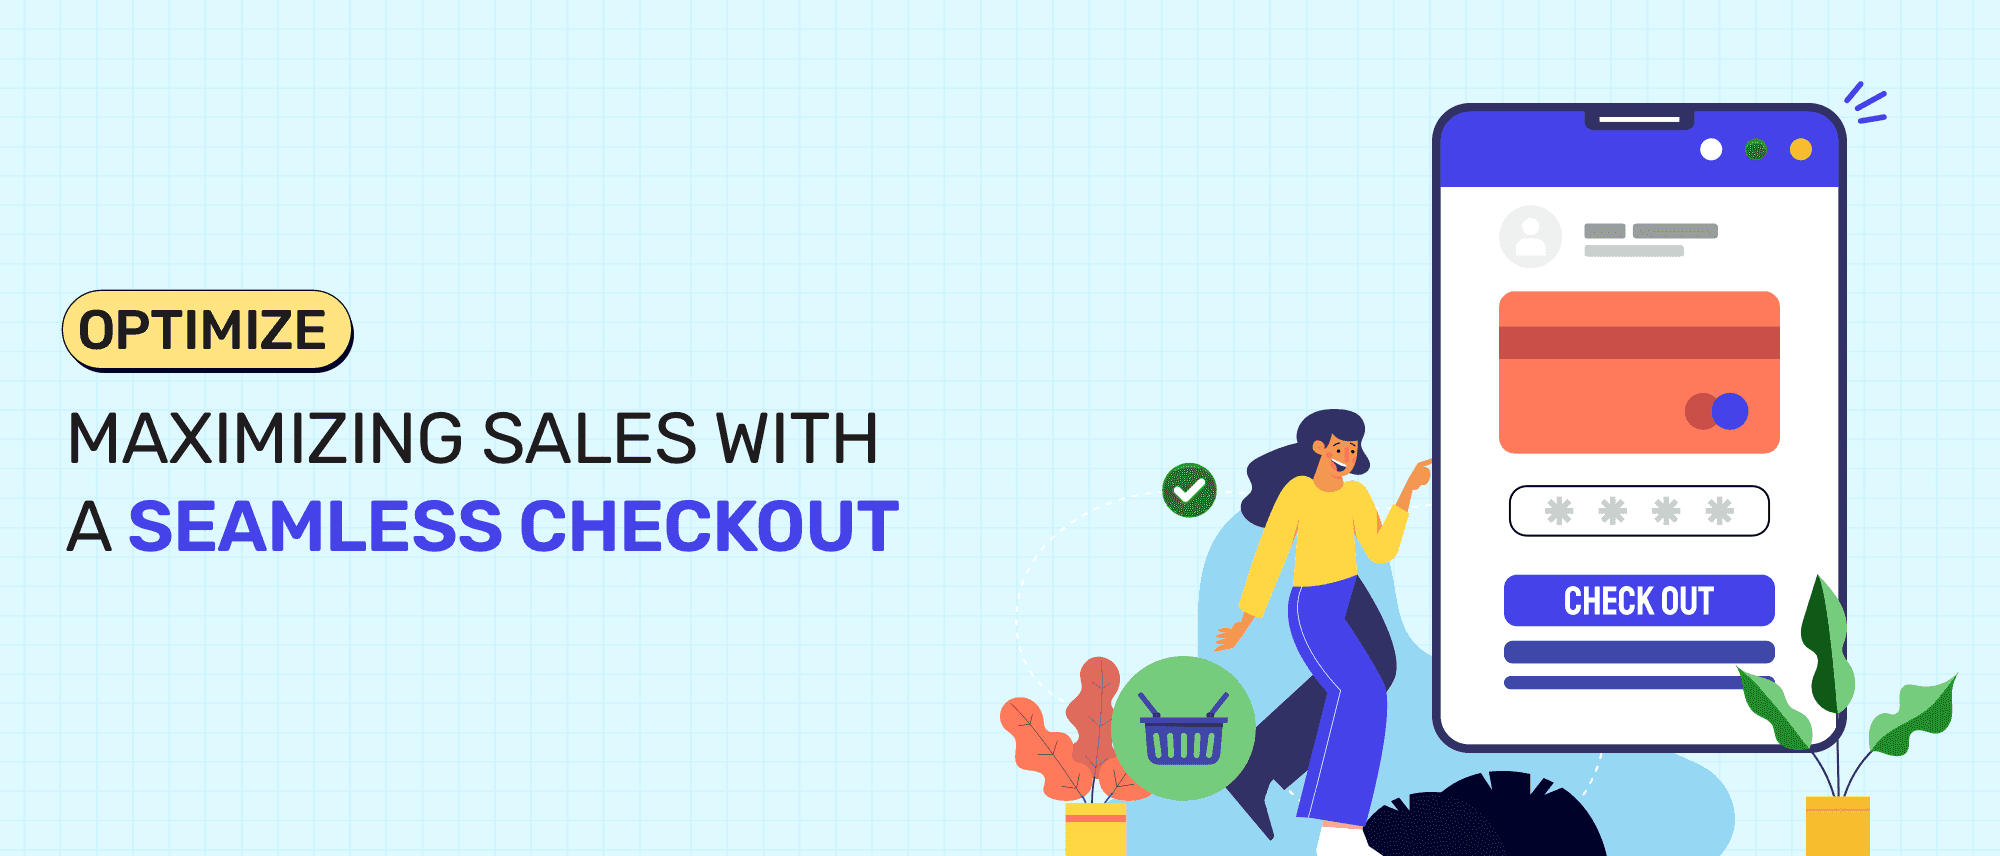 Best Practices To Reduce Checkout Abandonment